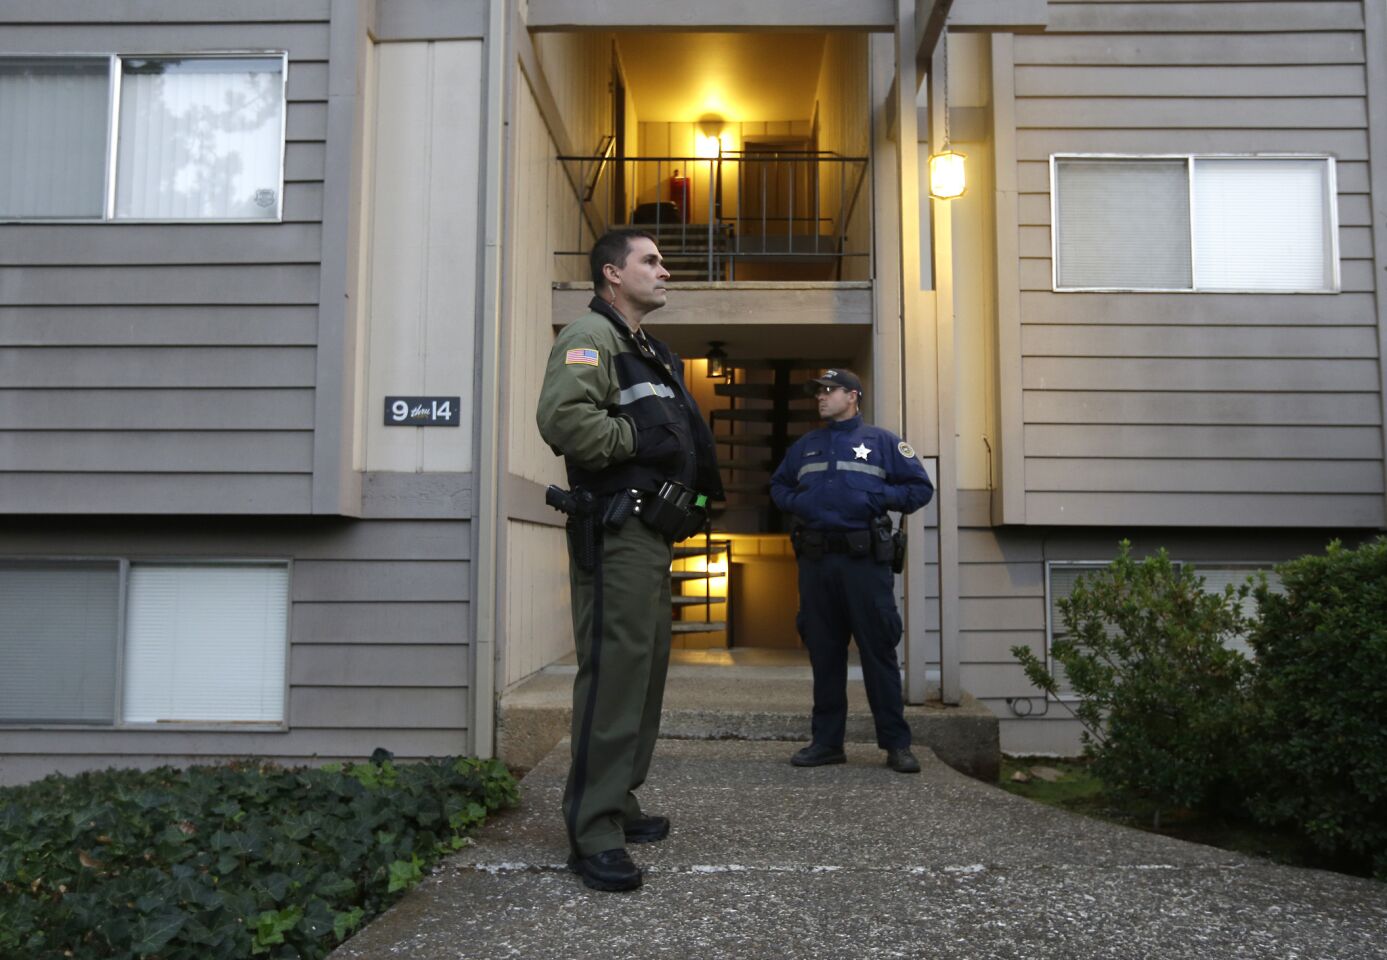 Douglas County Deputy Sheriff Greg Kennerly, left, and Oregon State Trooper Tom Willis, stand guard outside the apartment building, where alleged Umpqua Community College gunman Chris Harper Mercer lived.